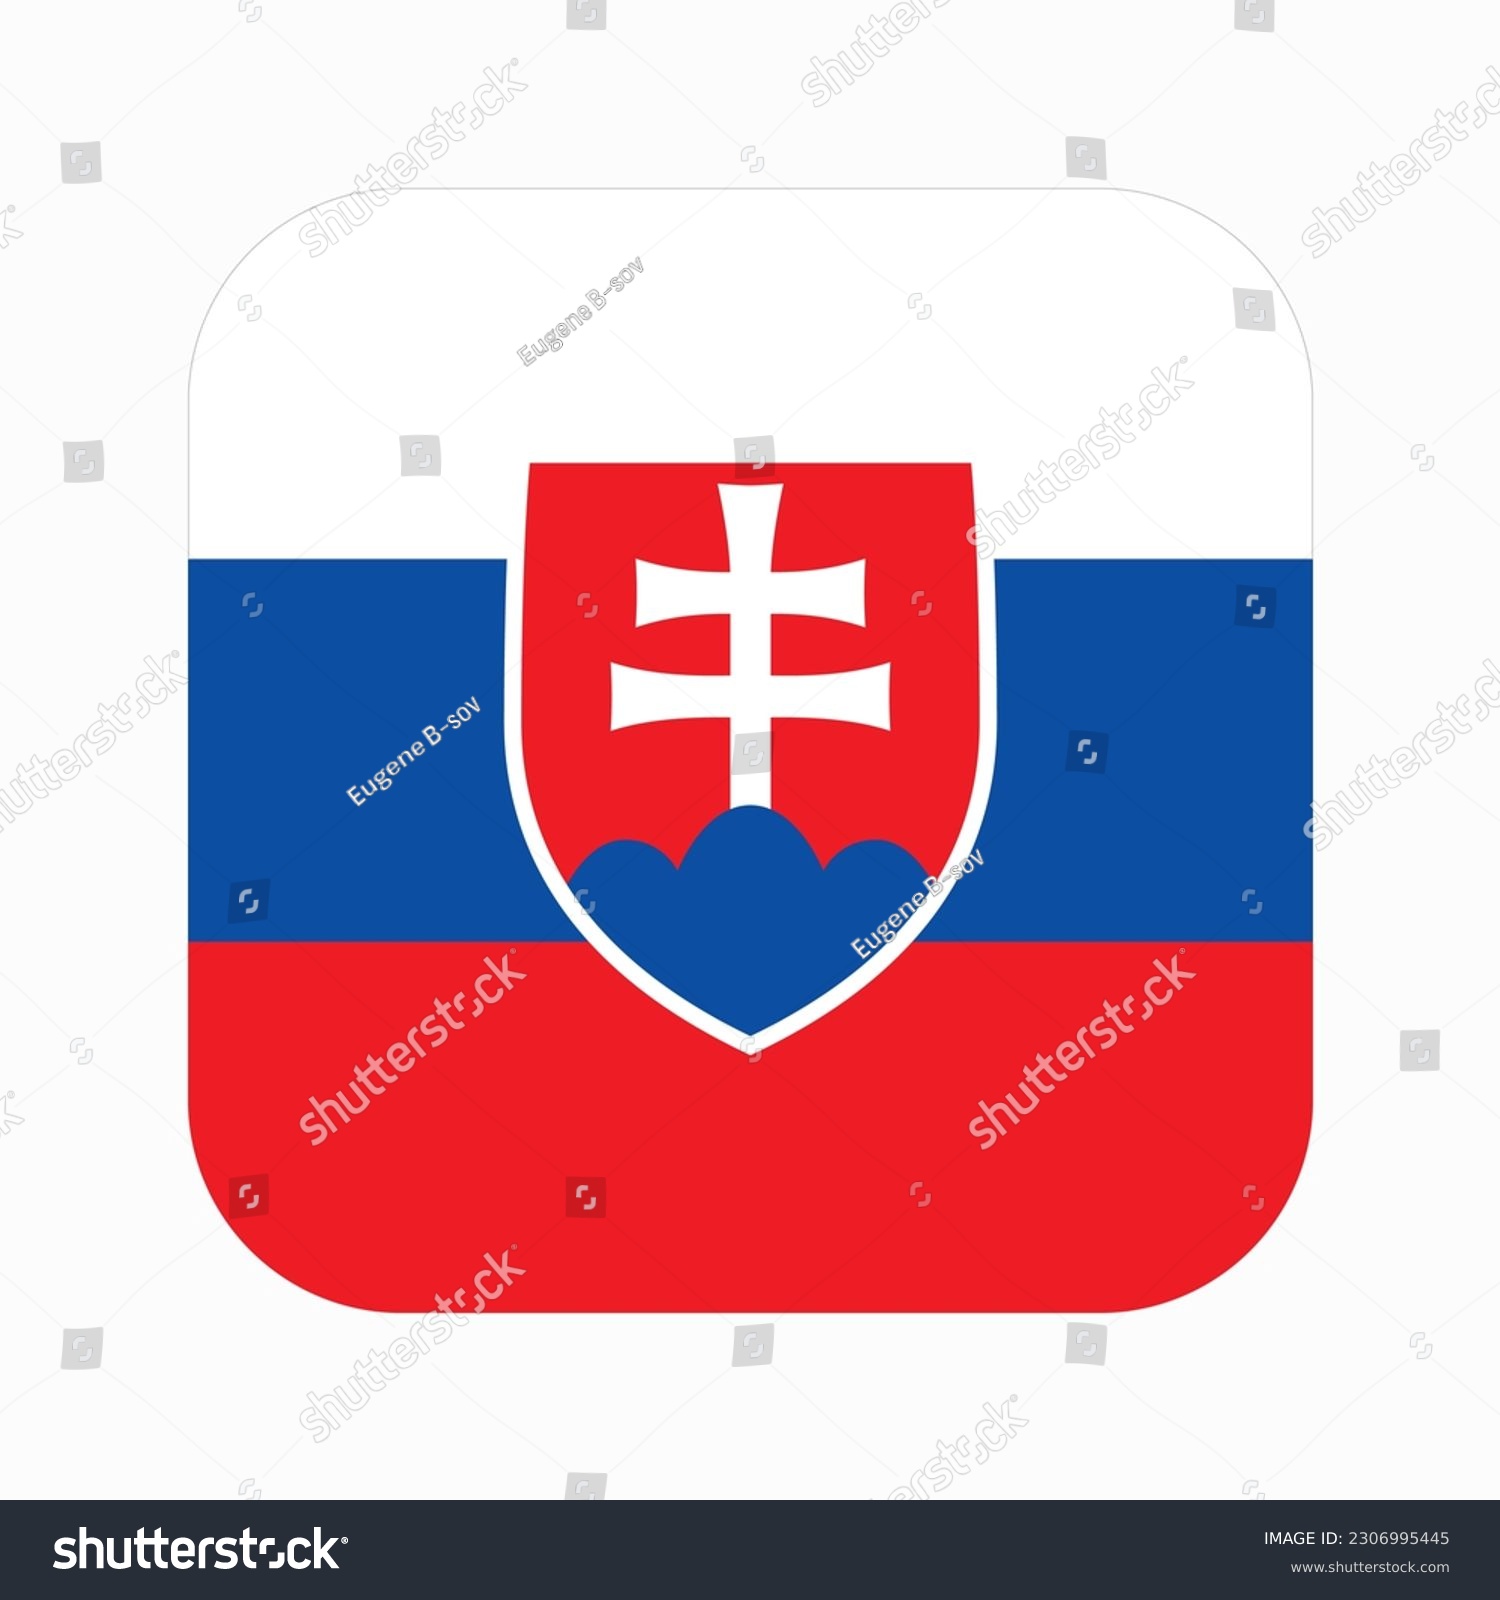 Slovakia icon images stock photos d objects vectors